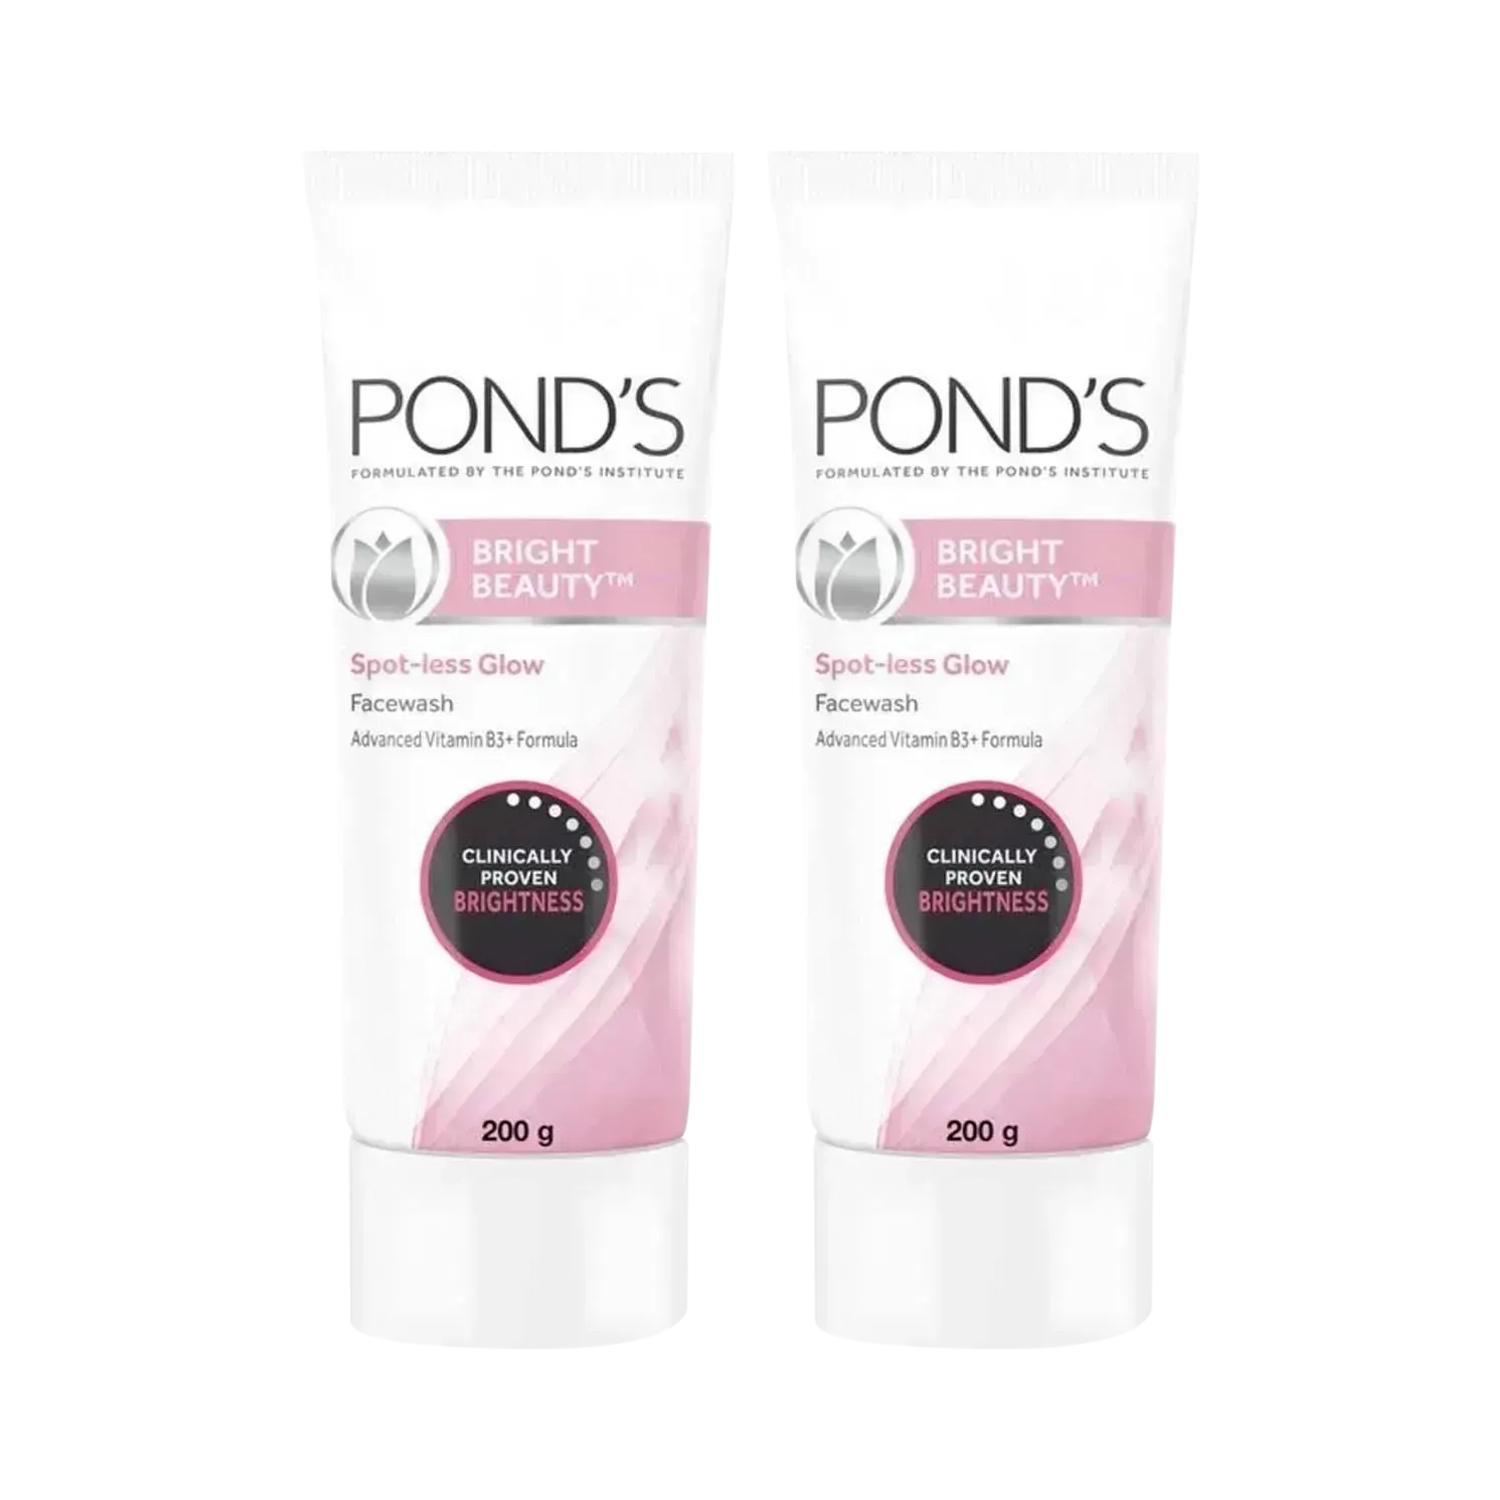 Pond's | Pond's Bright Beauty Facewash Pack of 2 Combo (2 x 200 g)